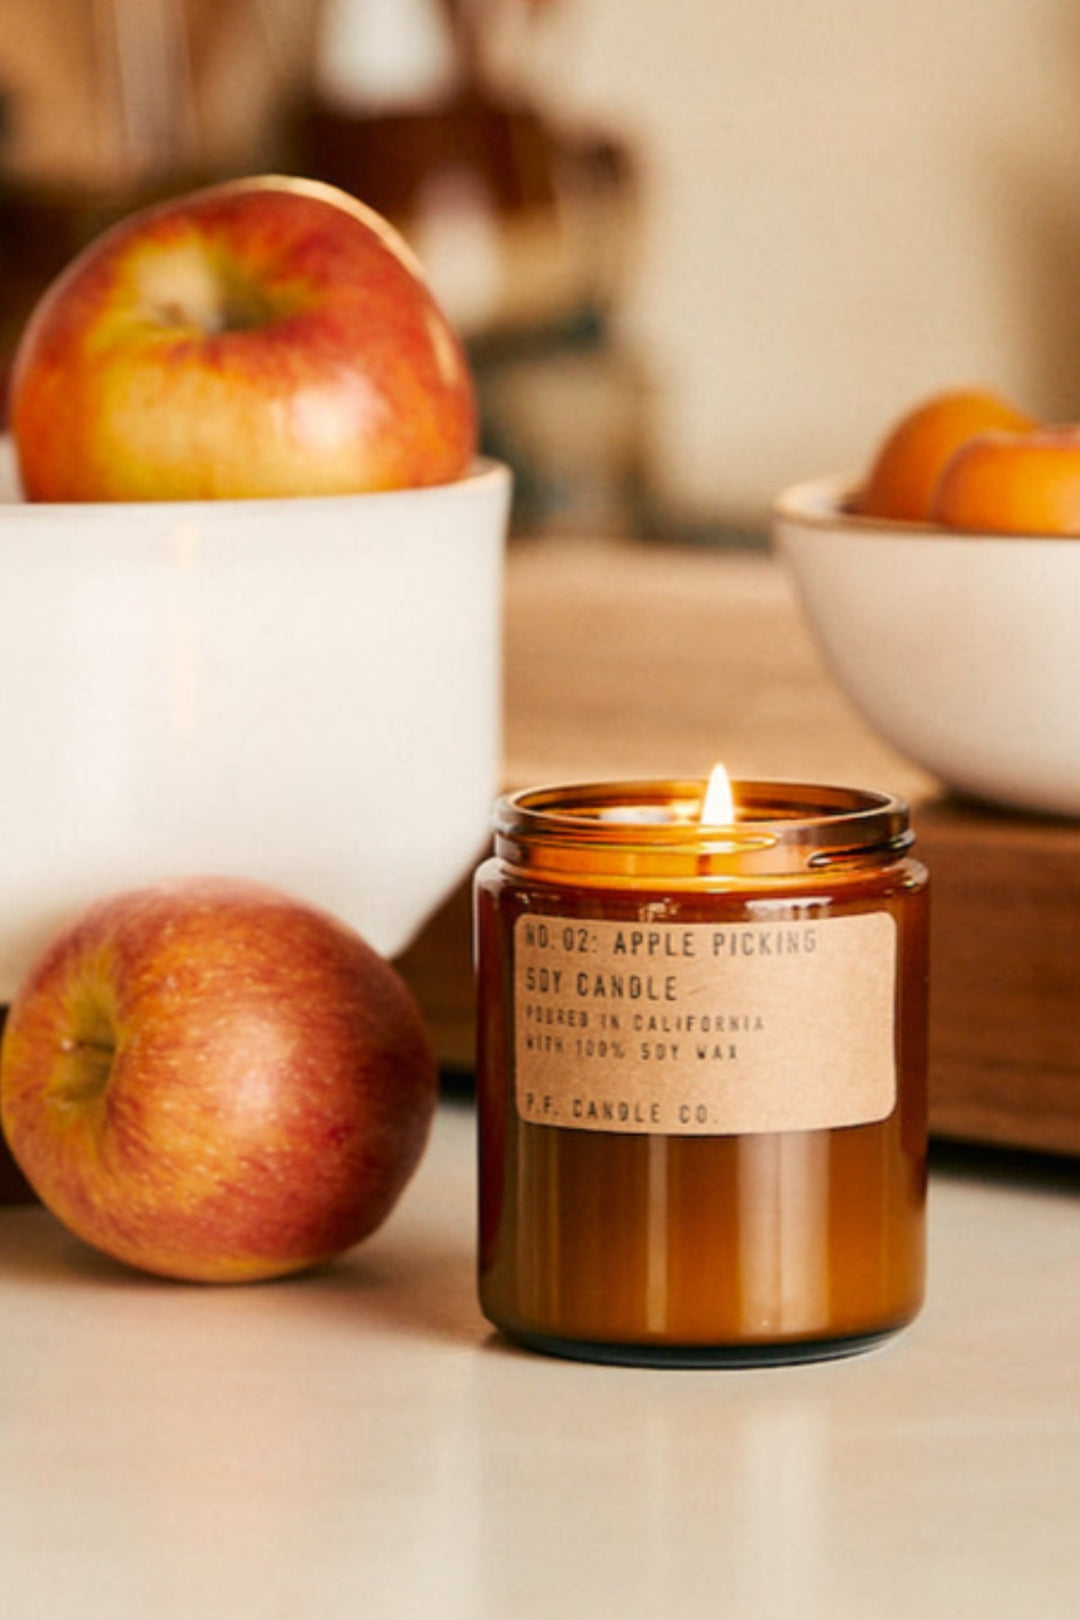 P.F. CANDLE CO. - SOY CANDLE 7.2 OZ - APPLE PICKING